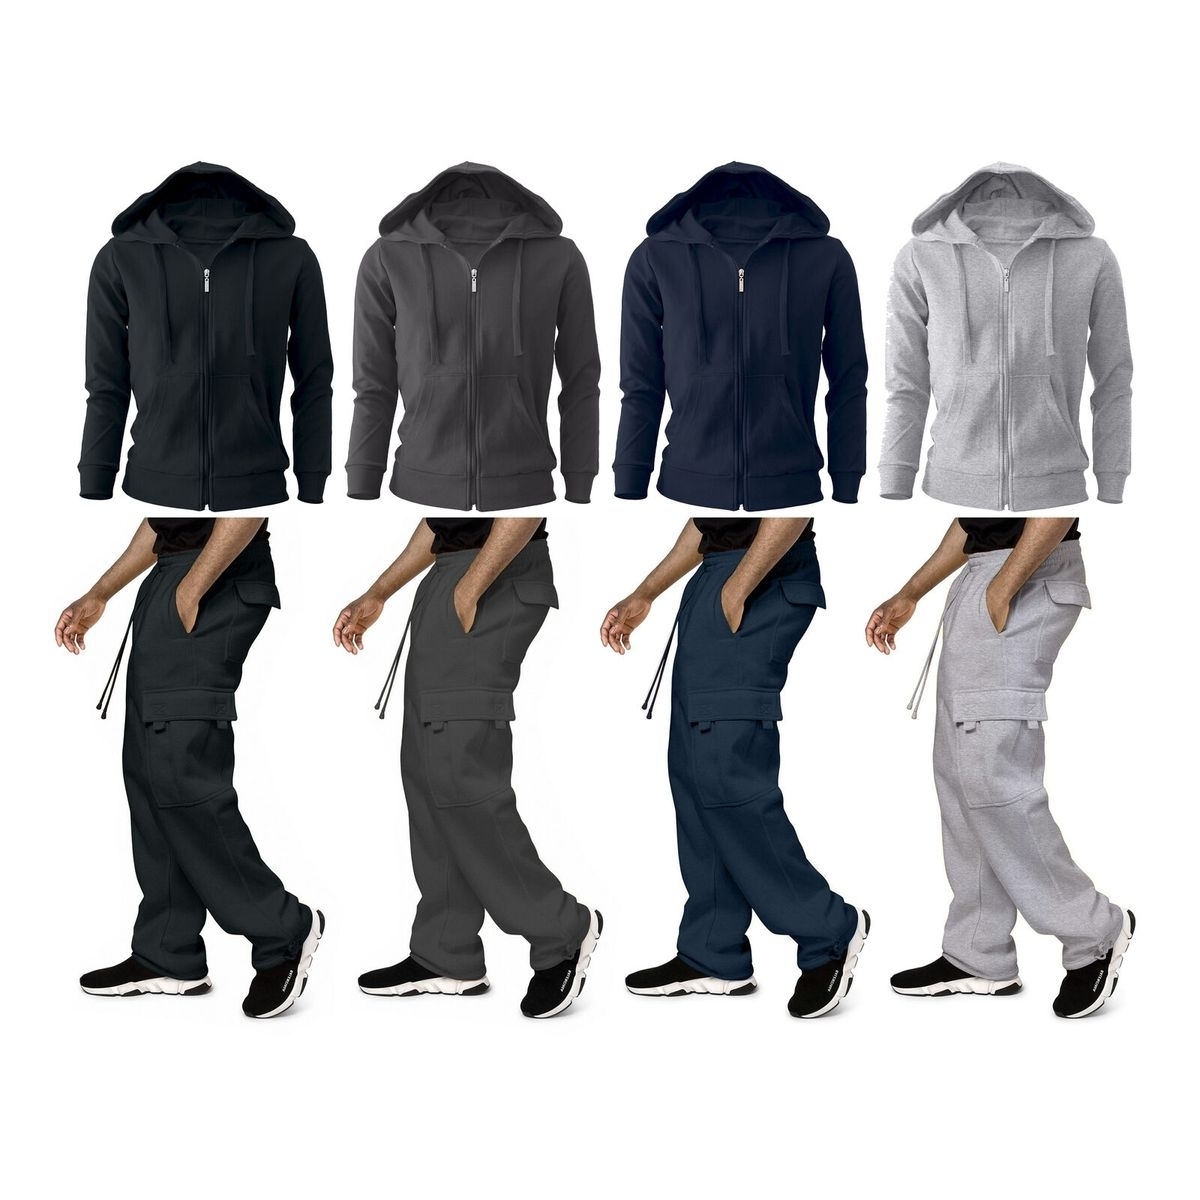 Men's Big & Tall Winter Warm Athletic Active Cozy Fleece Lined Multi-Pocket Full Zip Up Cargo Tracksuit - Navy, Xx-large